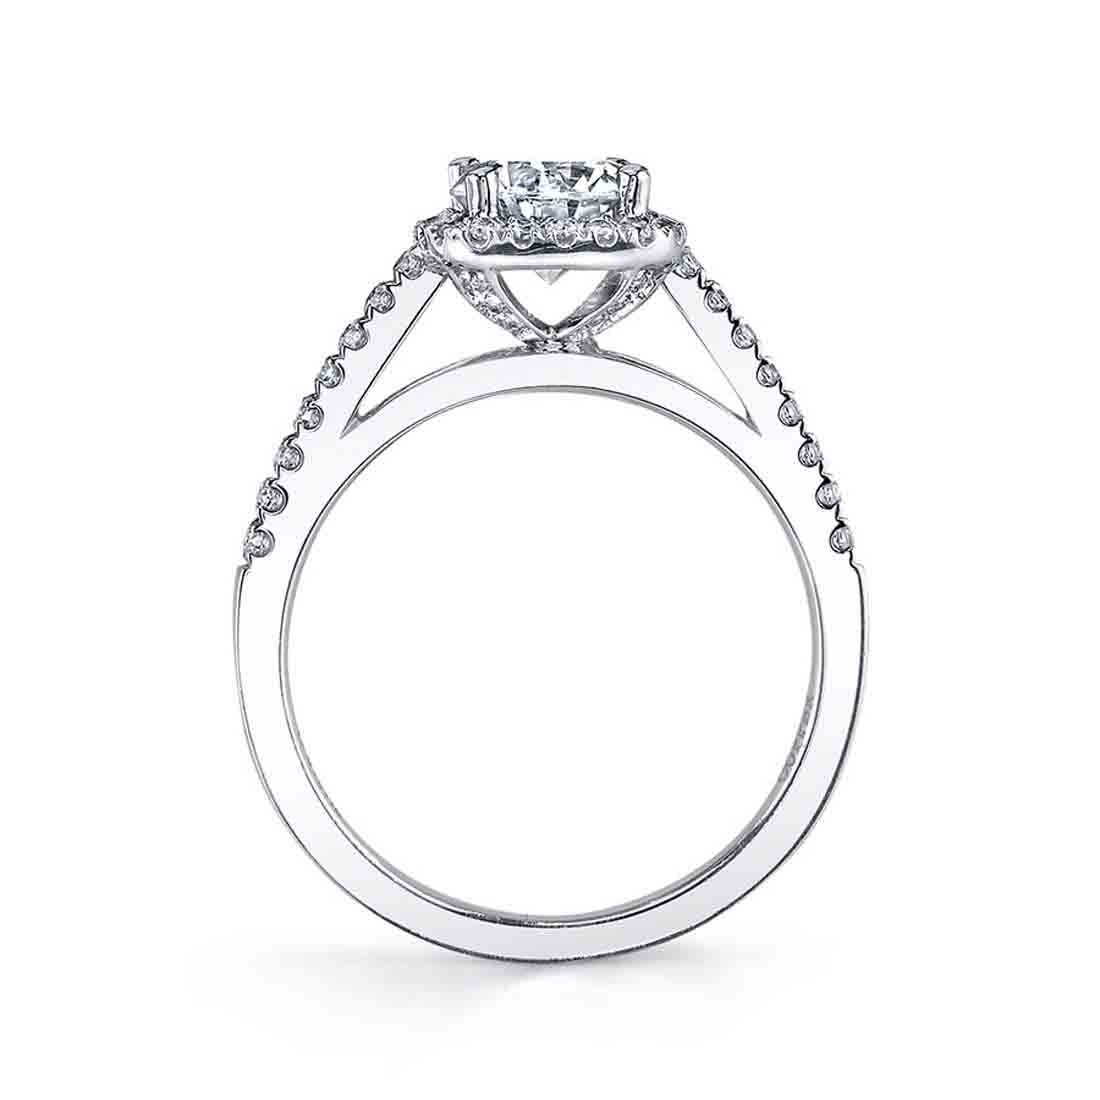 Profile Image of a Cushion Cut Engagement Ring with Halo